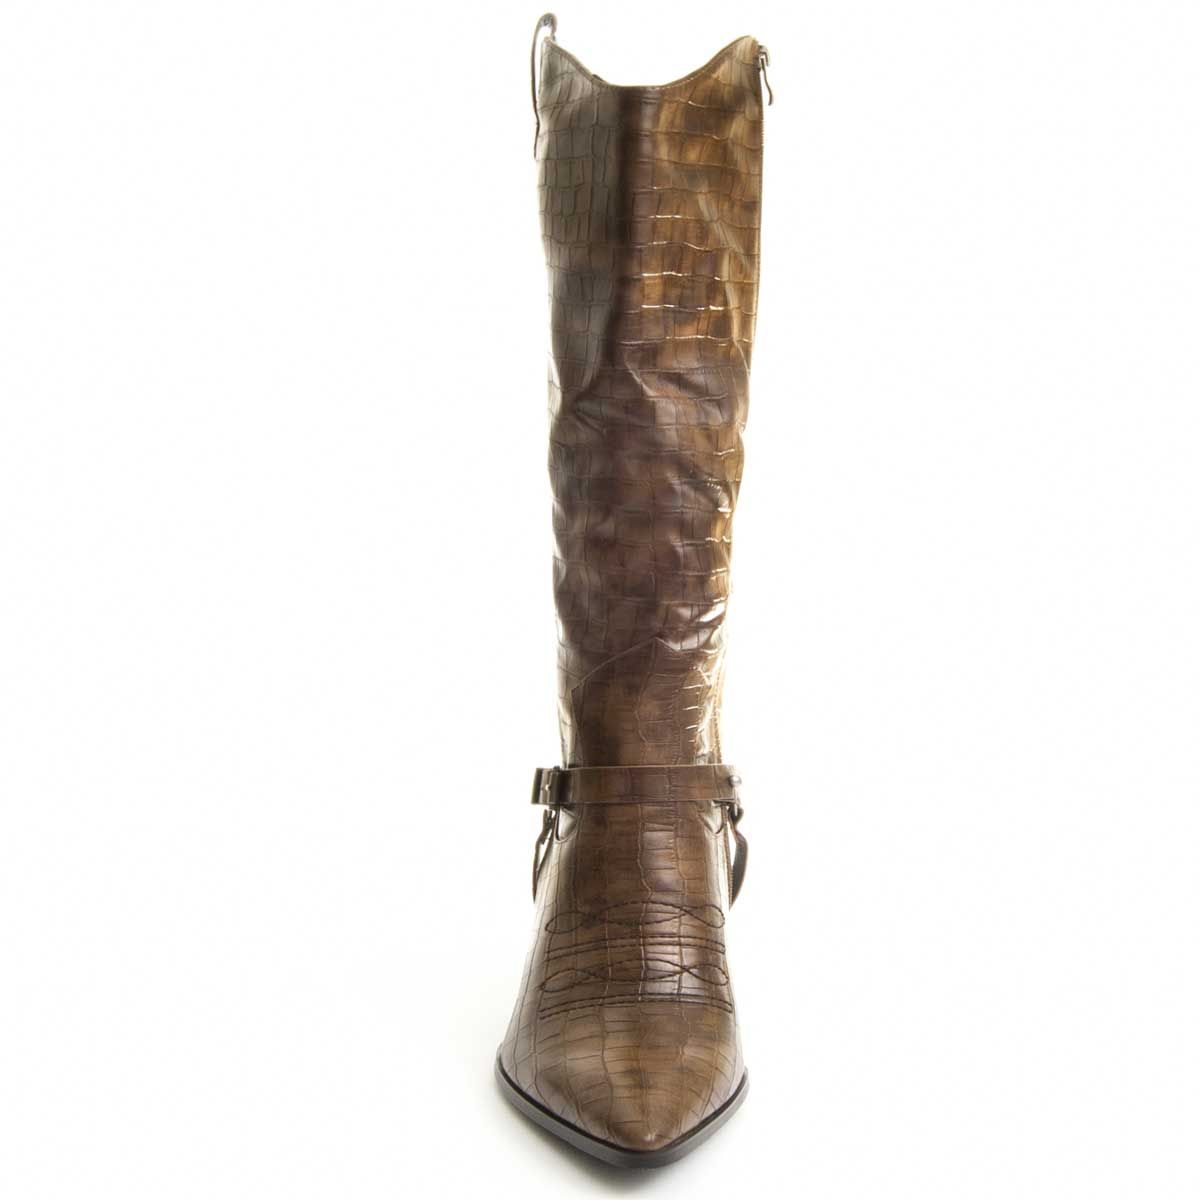 Montevita Laddy Knee High Boot in Brown